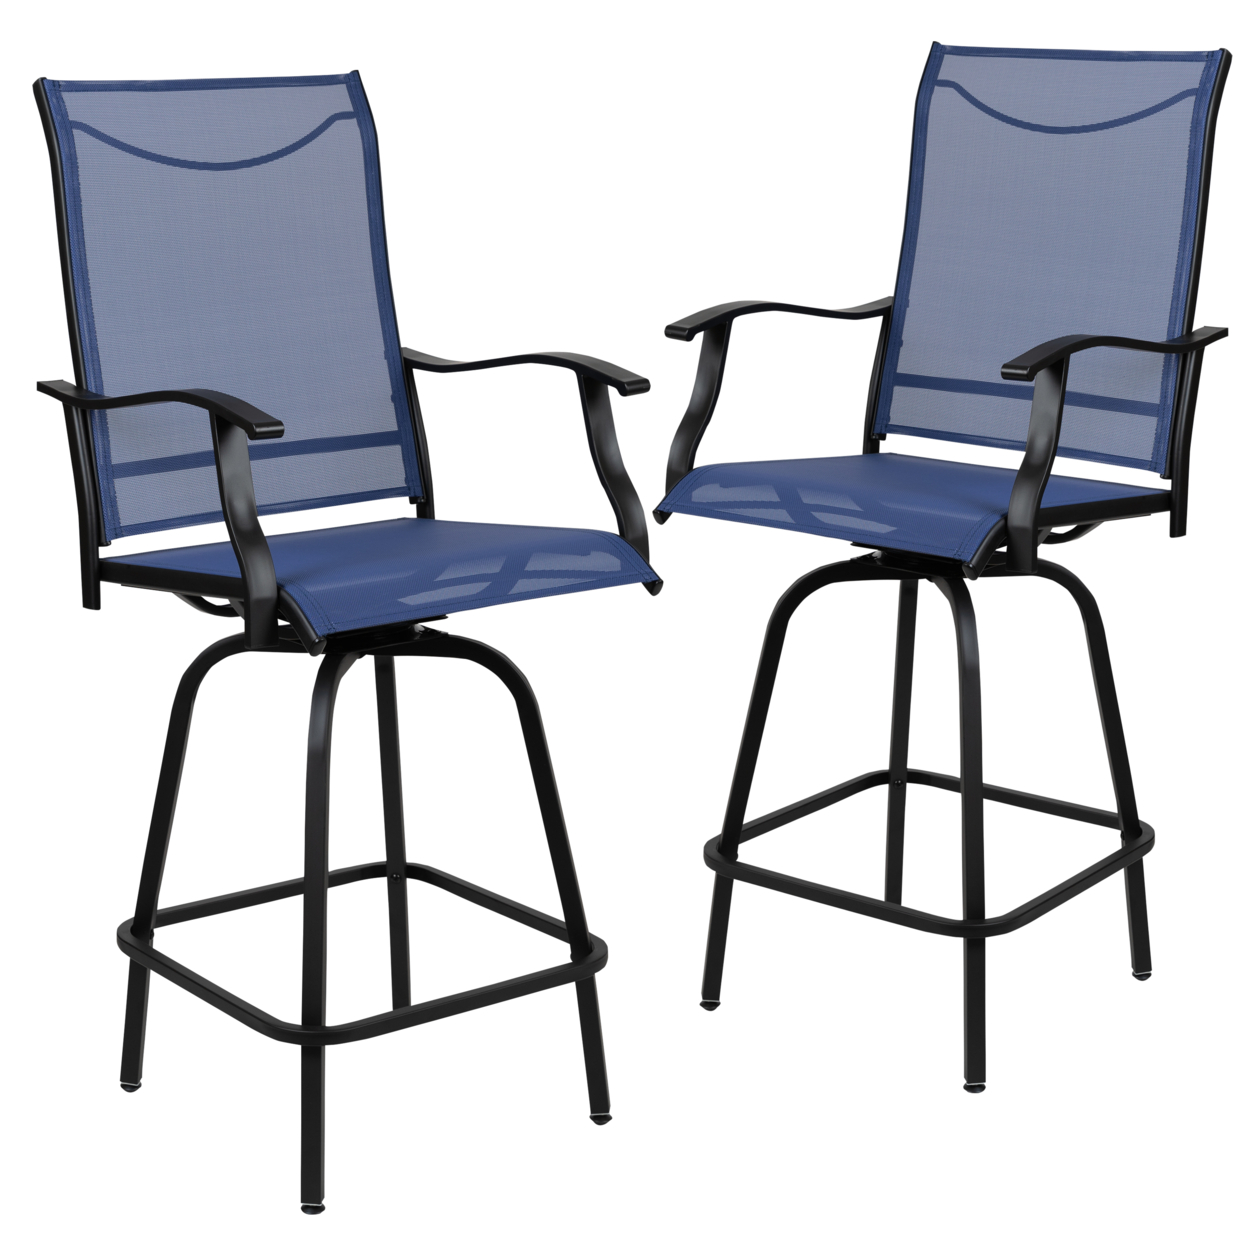 Patio Bar Height Stools Set Of 2, All-Weather Textilene Swivel Patio Stools And Deck Chairs With High Back & Armrests In Navy